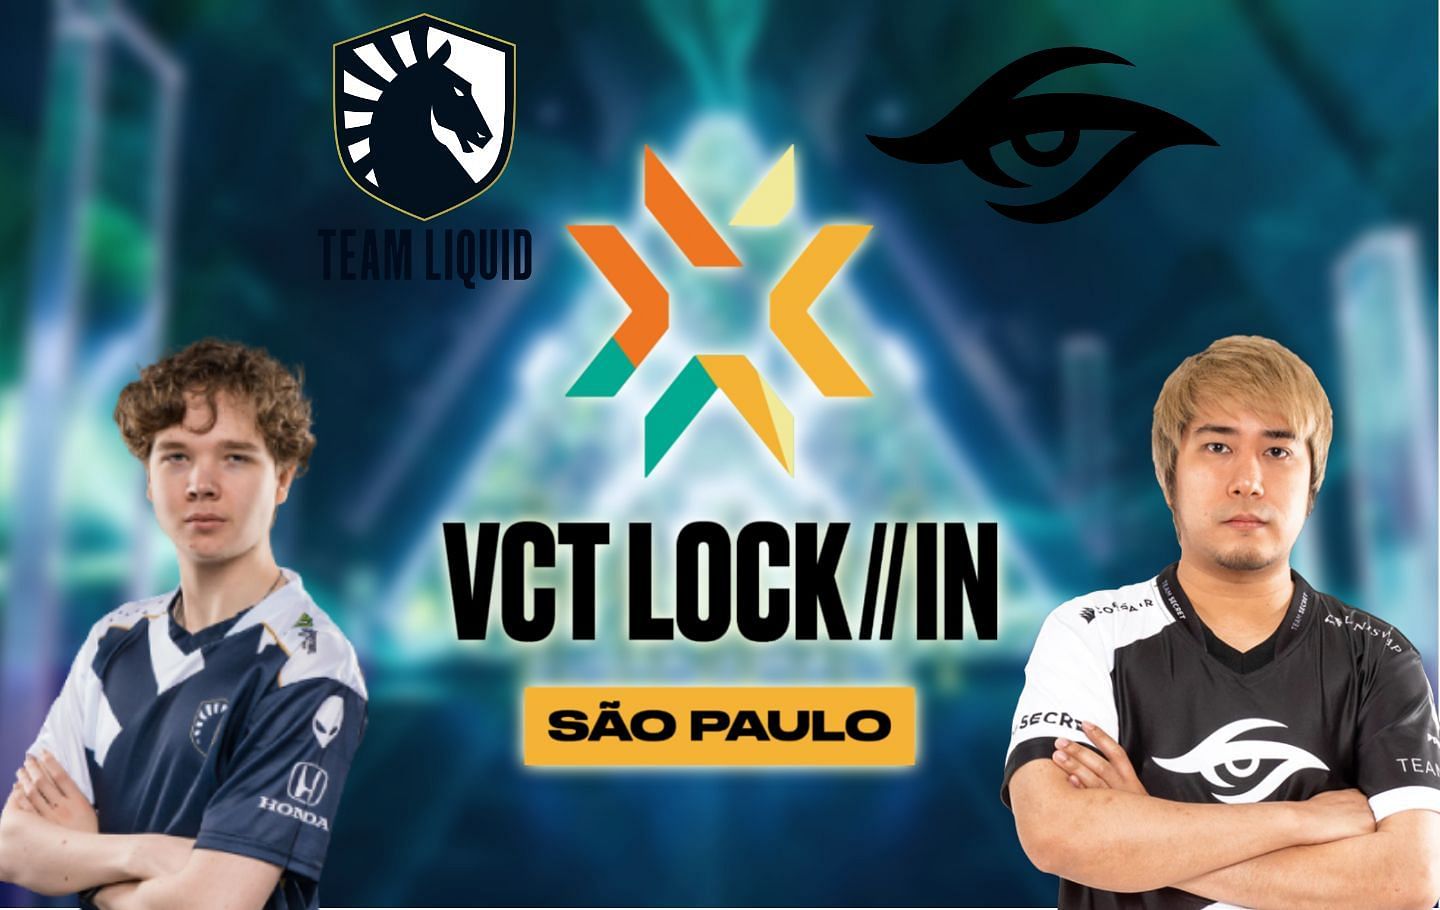 Team Liquid vs Team Secret: Who will win the upcoming Round 1 matchup in VCT LOCK//IN 2023? (Image via Sportskeeda)